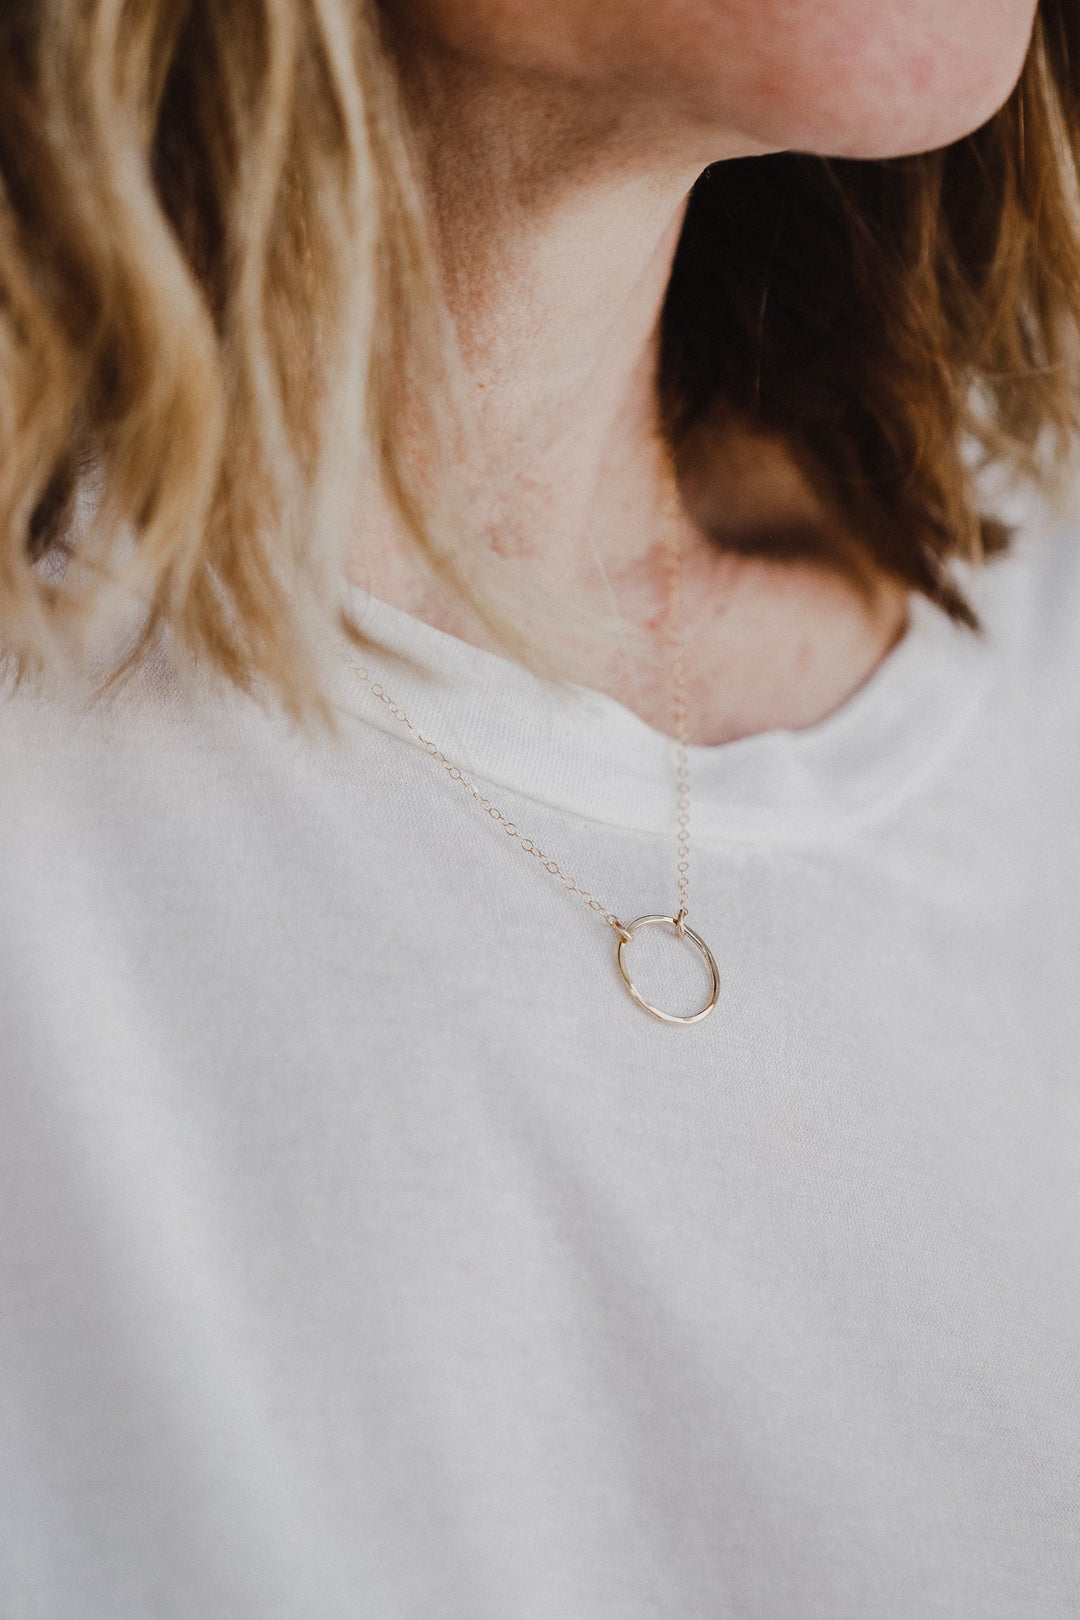 Gold Full Circle Necklace - Heyday